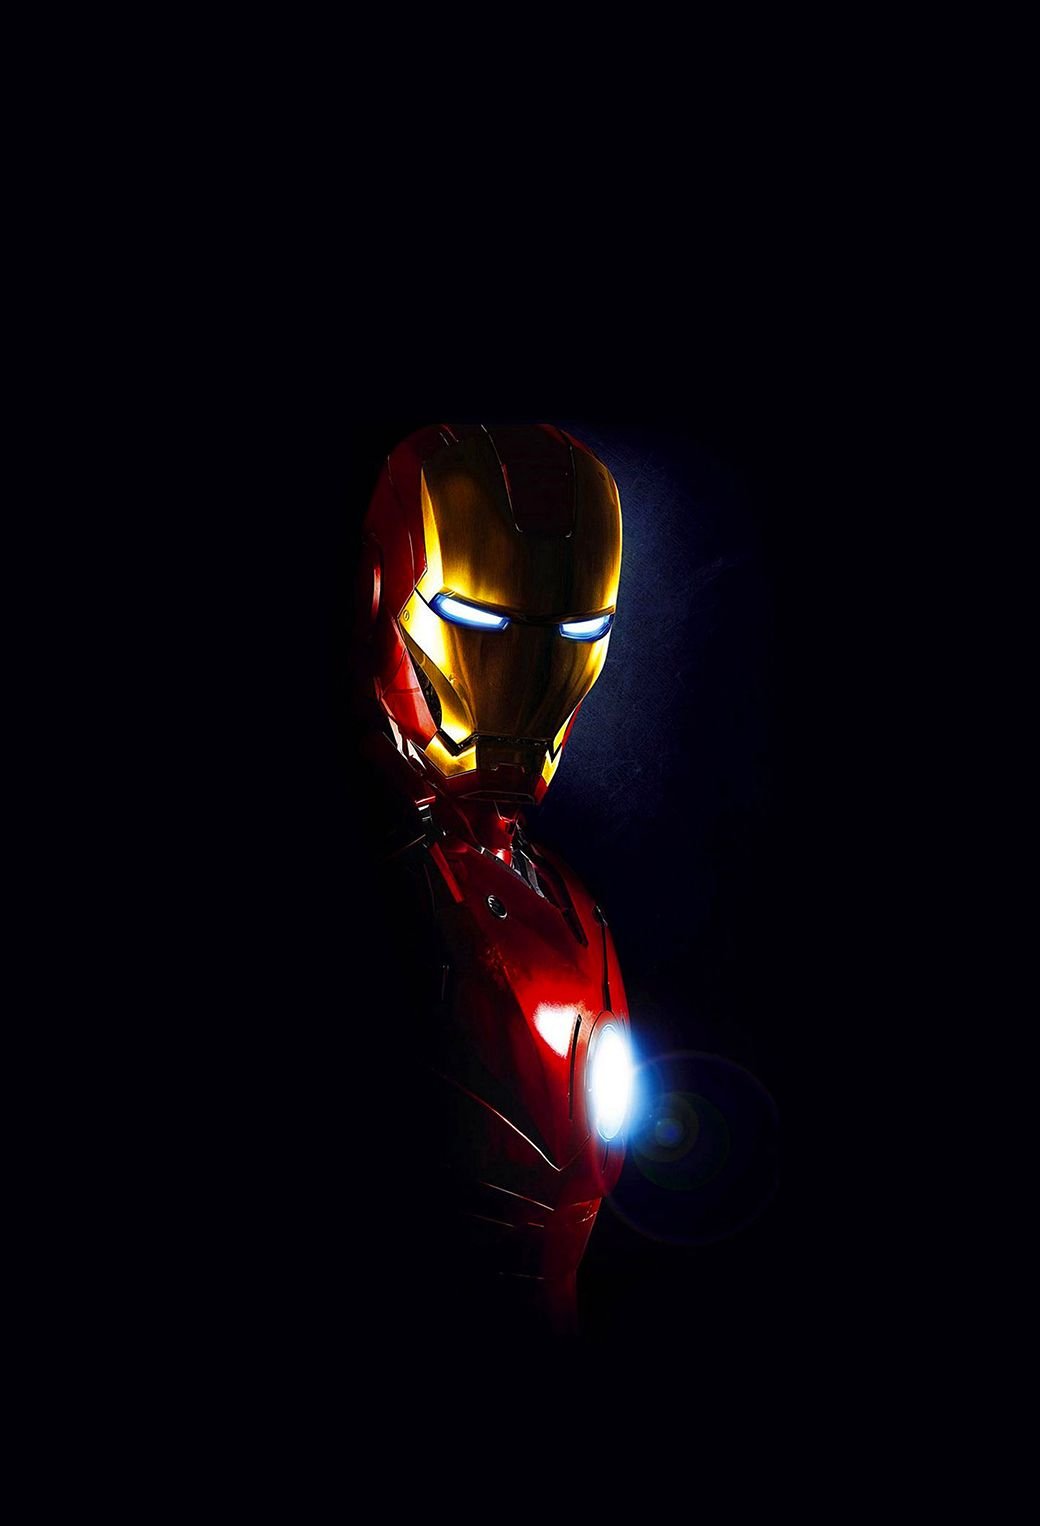 Iron Man in Dark Wallpapers for iPhone 11, Pro Max, X, 8, 7, 6